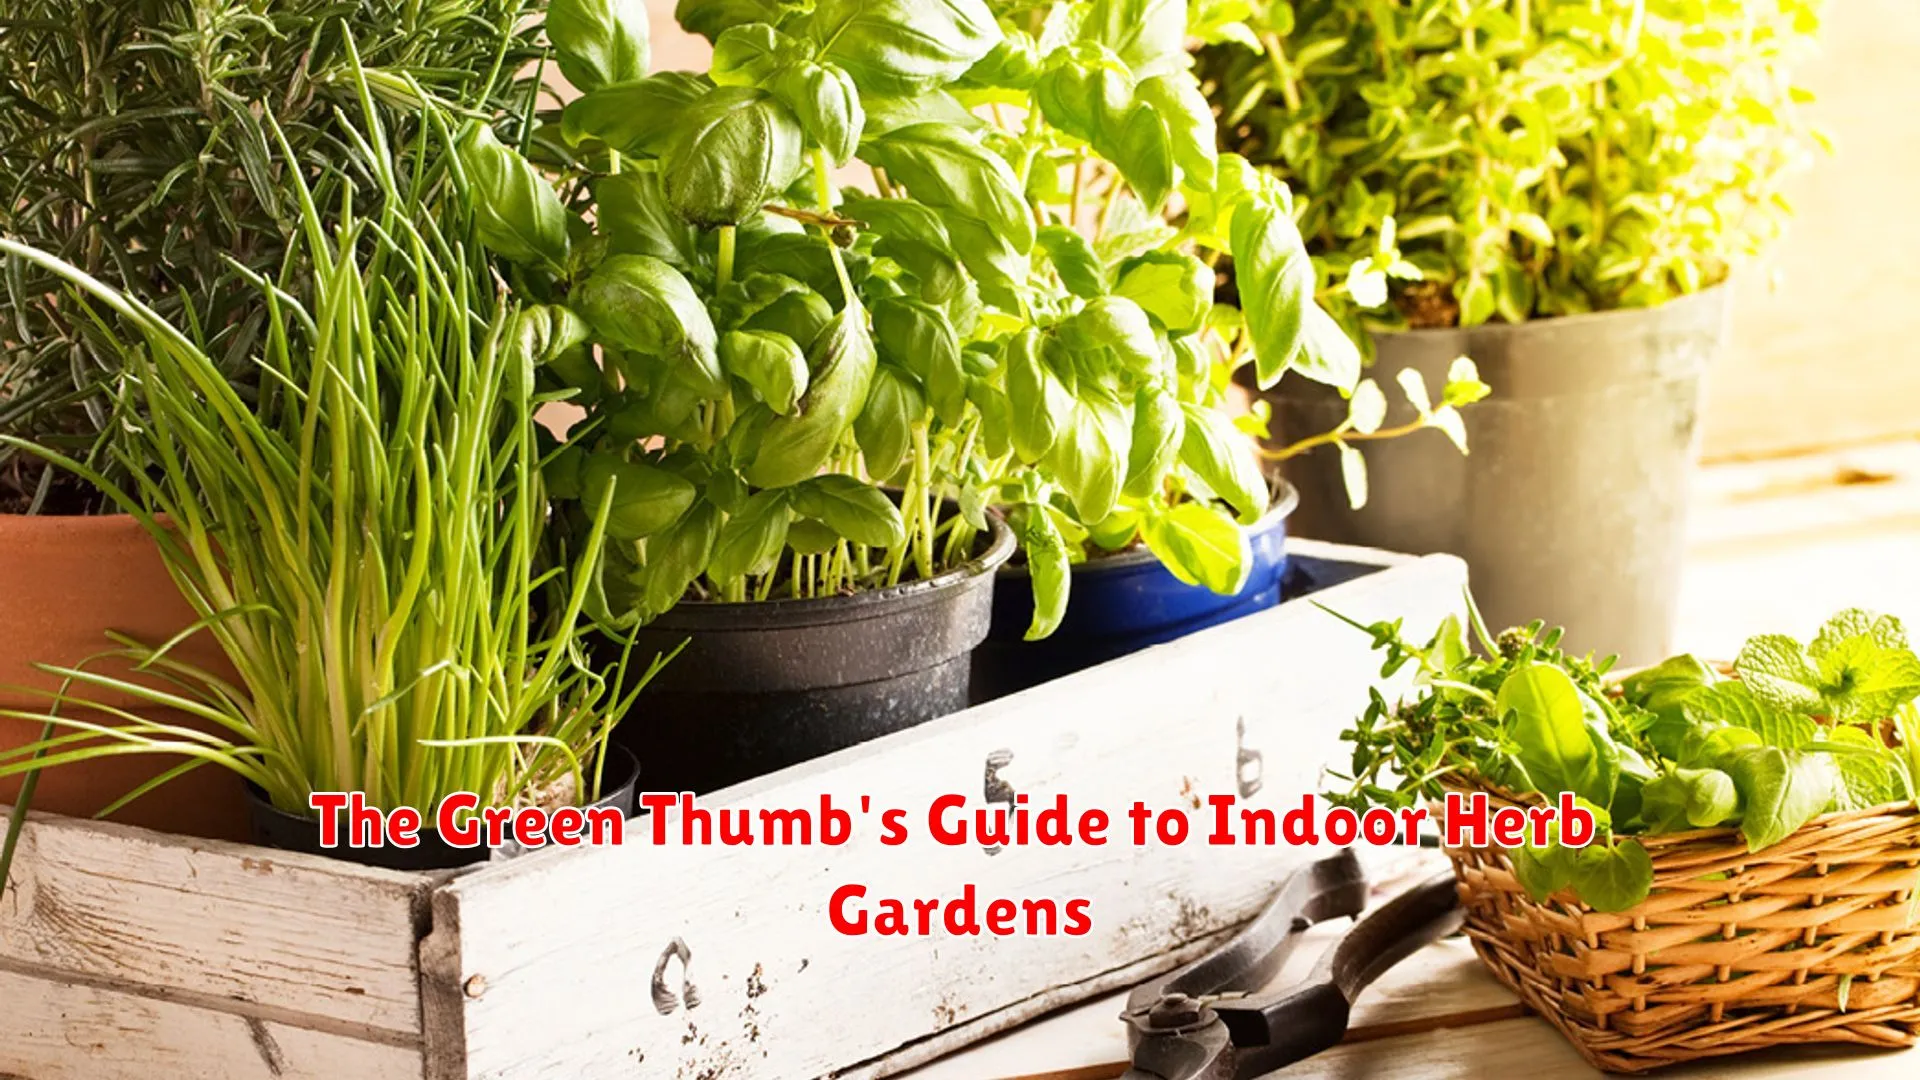 The Green Thumb's Guide to Indoor Herb Gardens